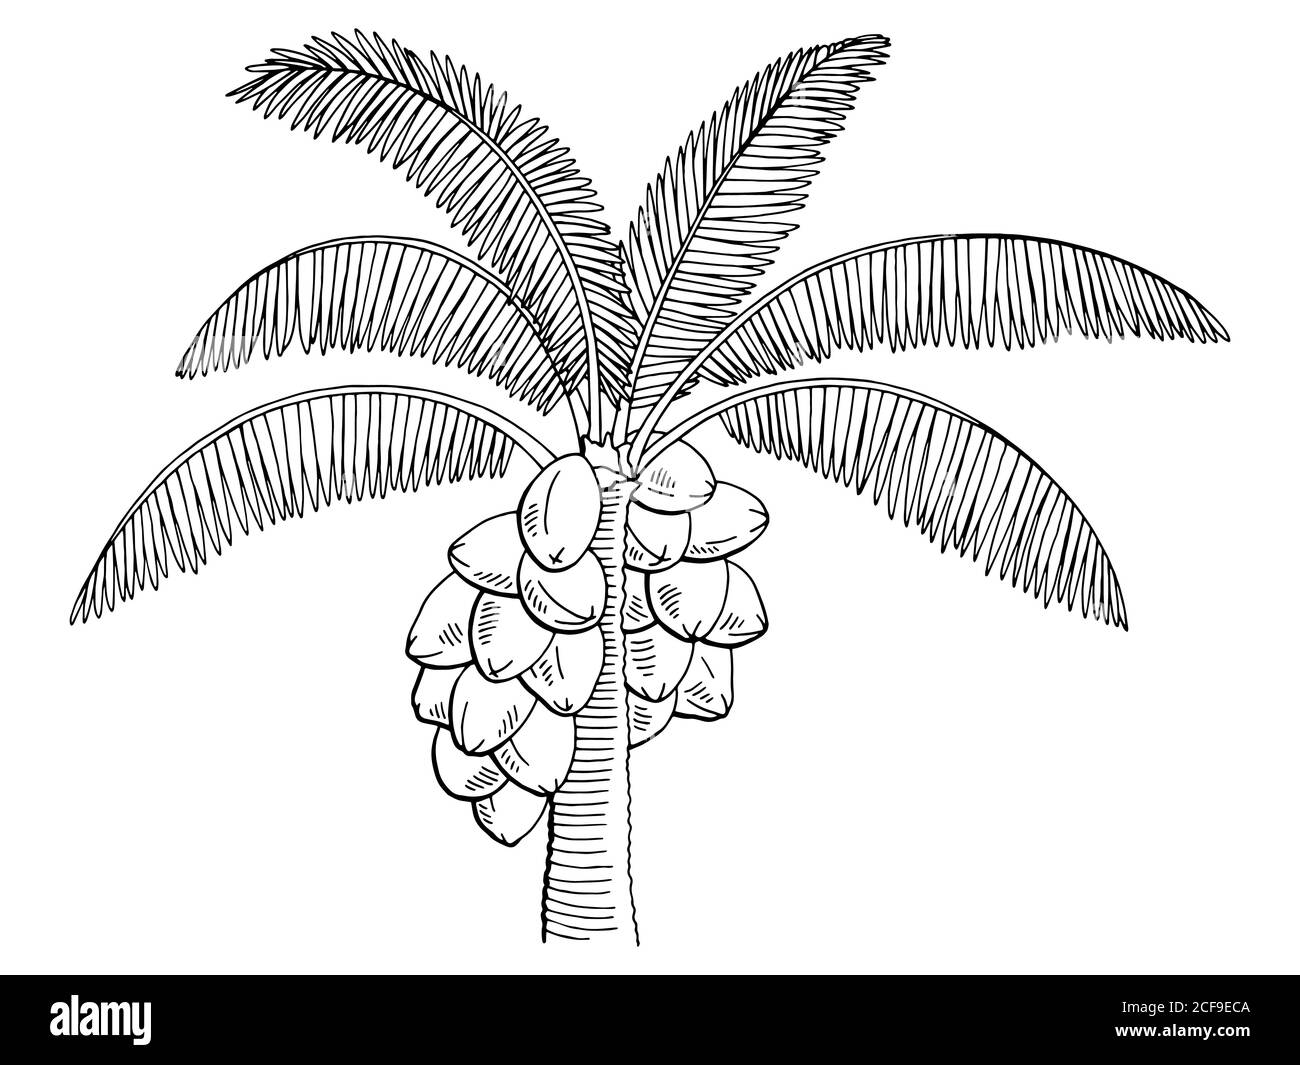 Coconut palm tree graphic black white isolated sketch illustration vector Stock Vector